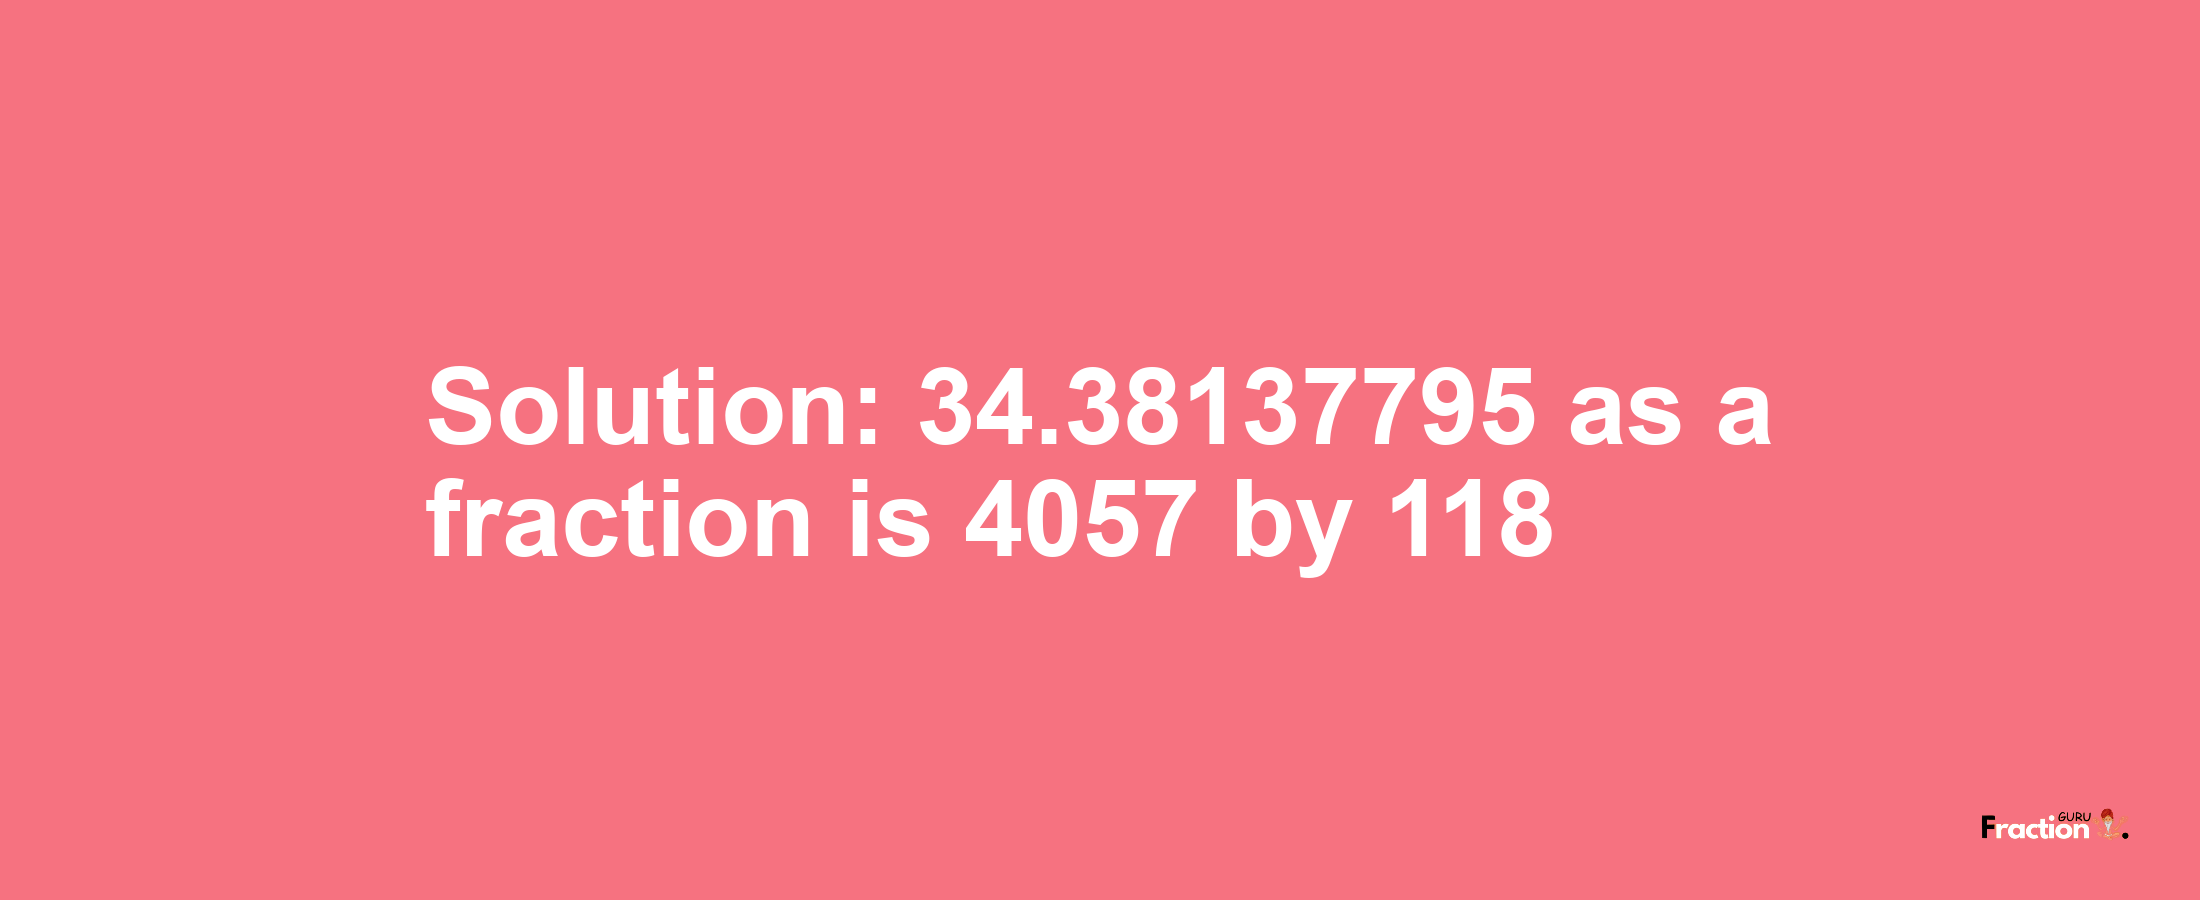 Solution:34.38137795 as a fraction is 4057/118